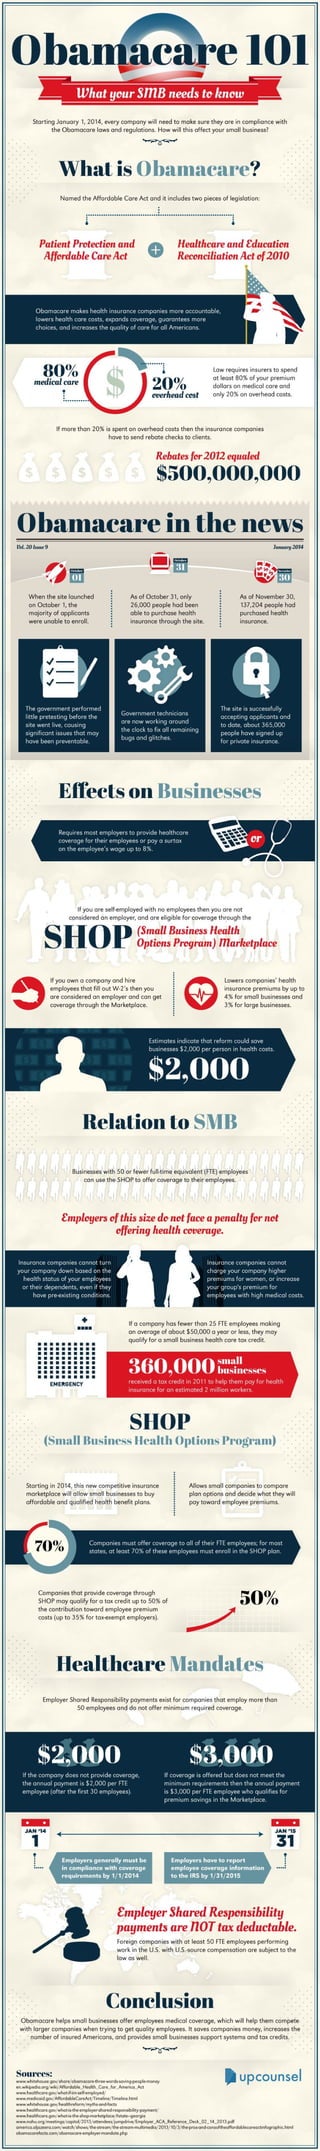 Obamacare 101: What your small business needs to know